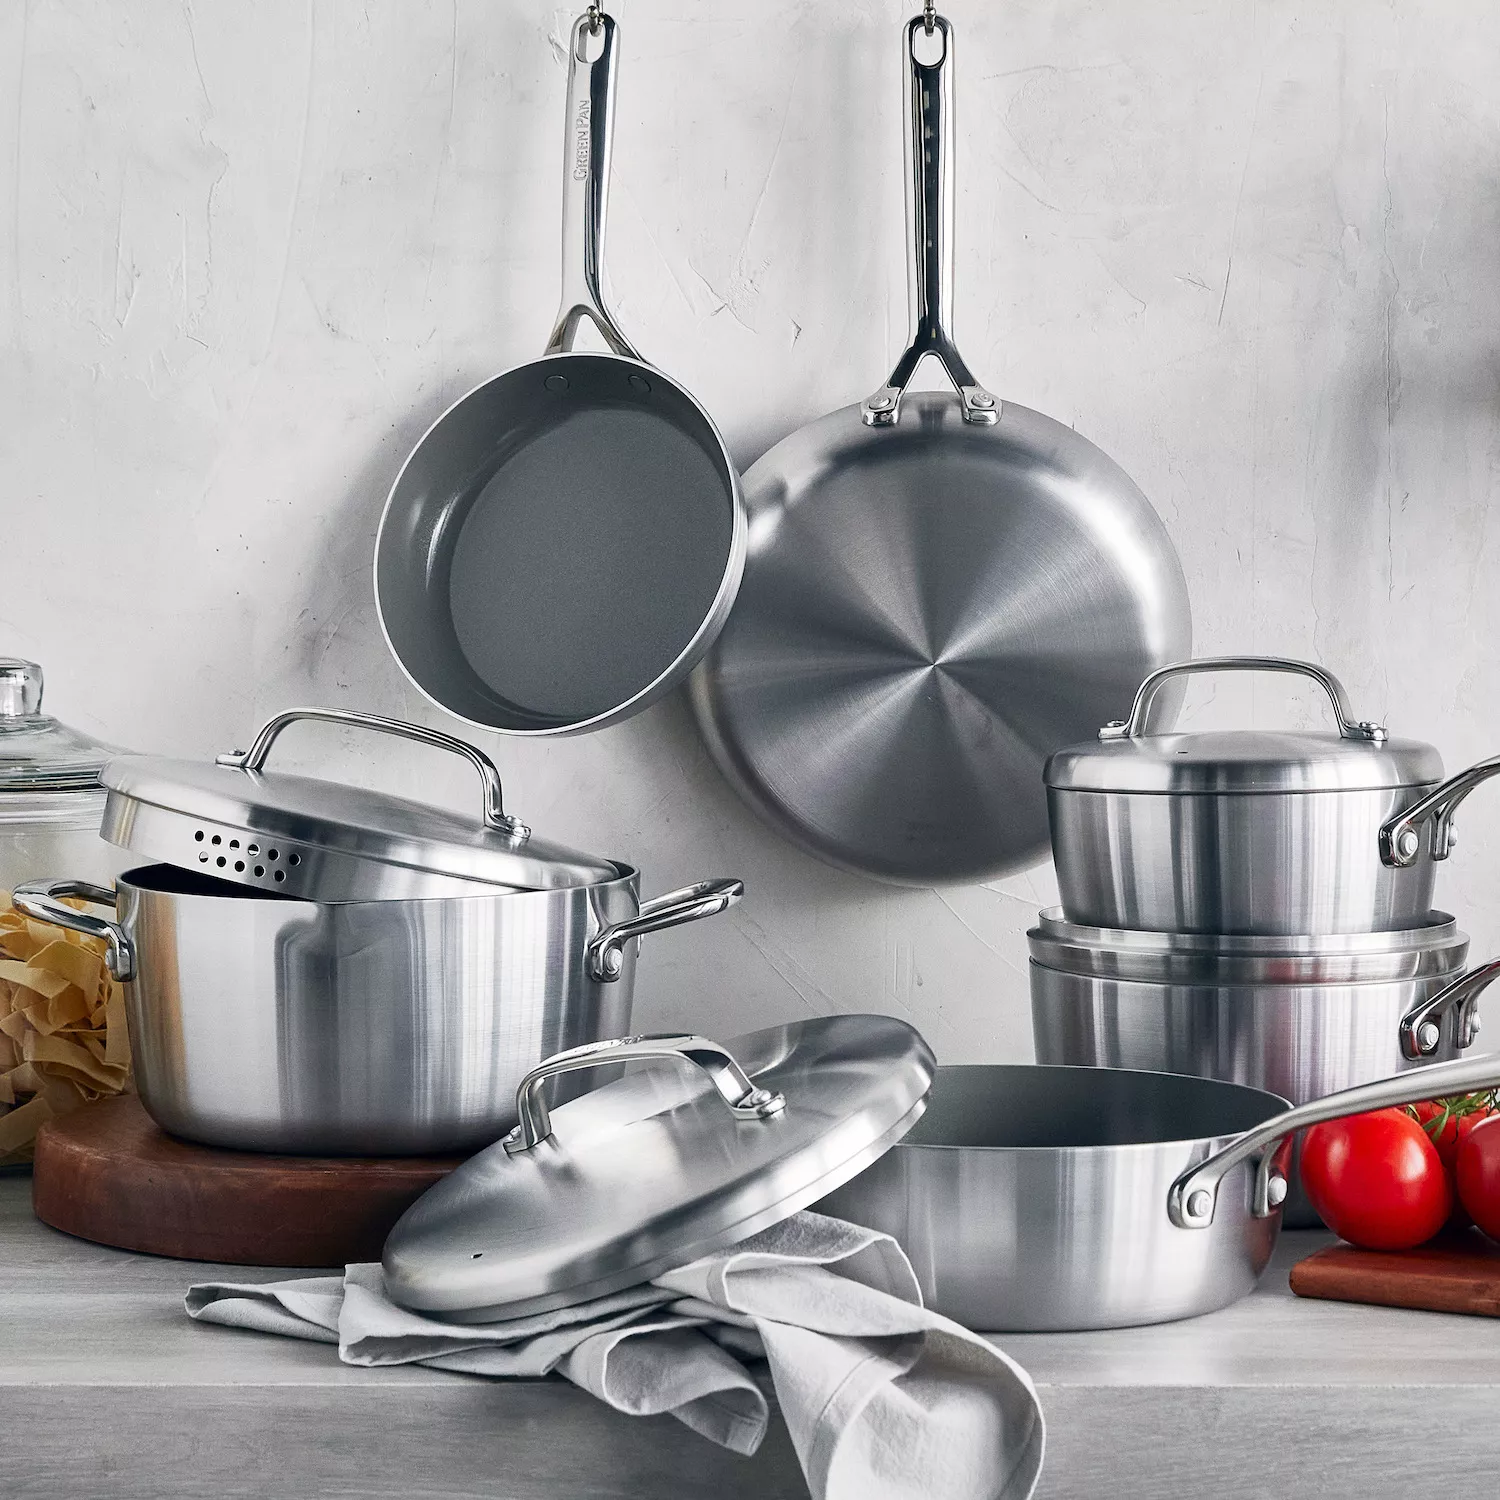 GP5 Stainless Steel 10-Piece Cookware Set